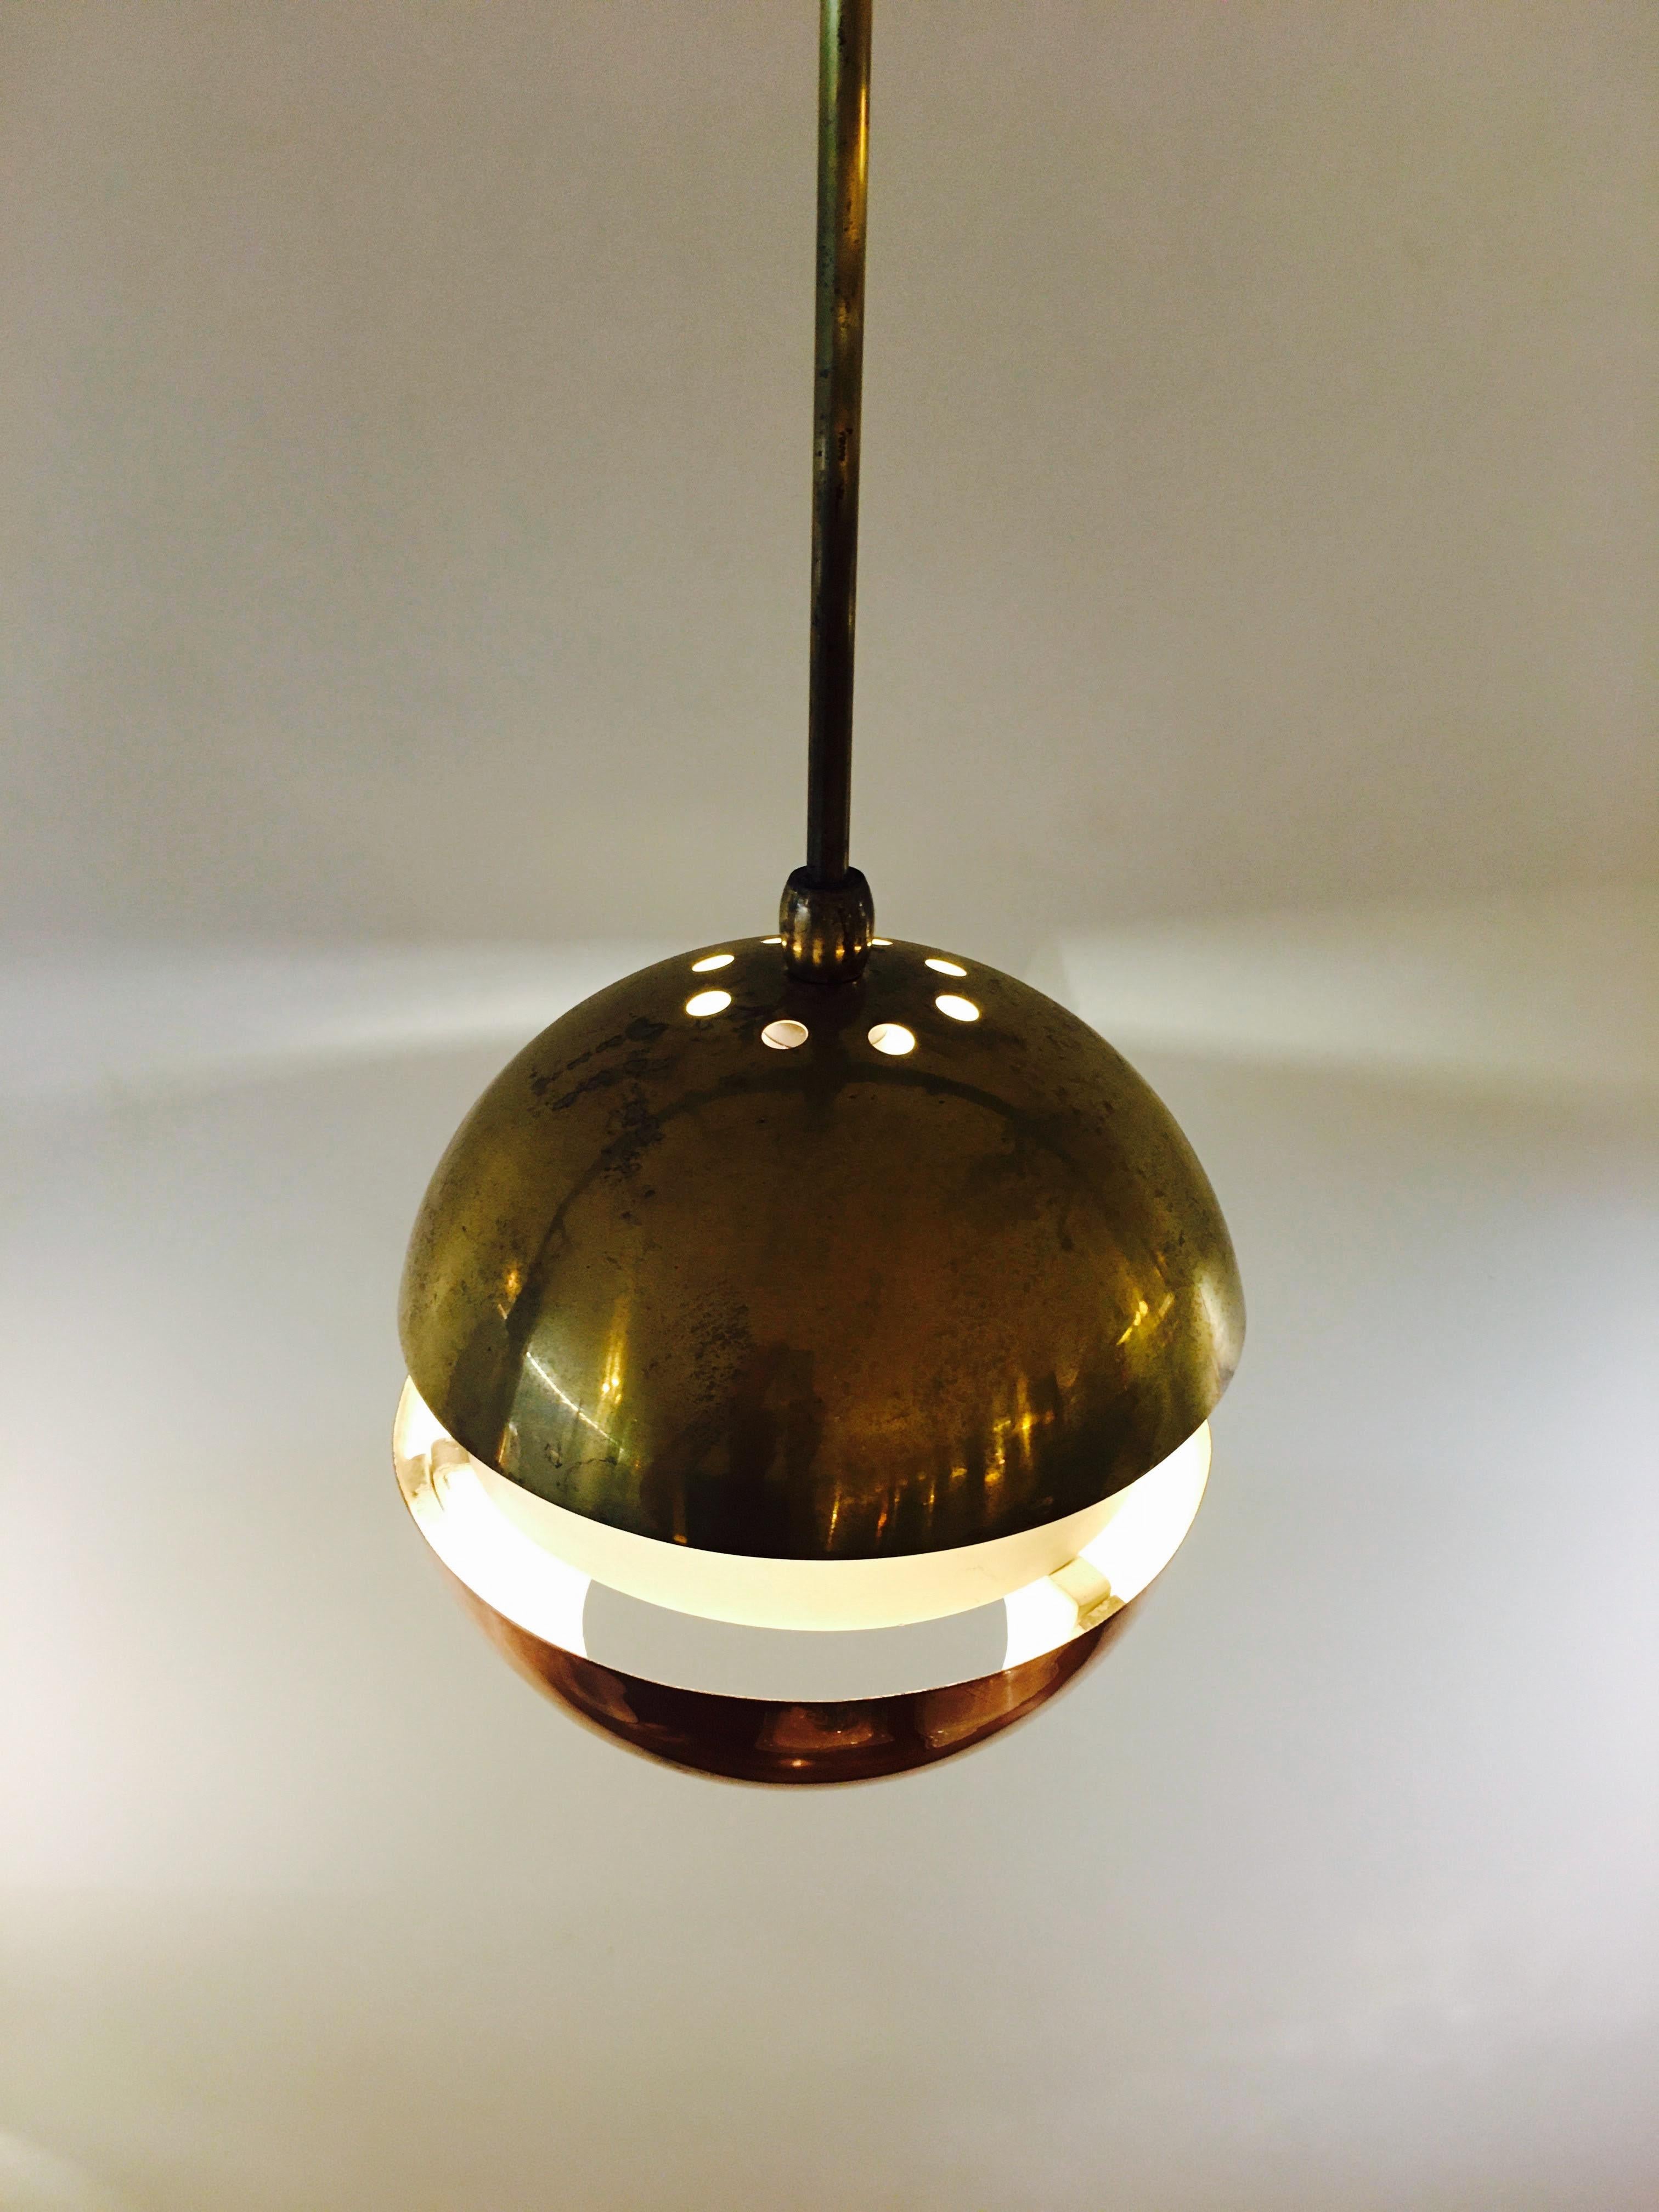 Brass and copper spherical/globe shape pendants
The relationship between copper and brass is particularly interesting when illuminated.
Mid-Century Modern
Scandinavian Modern.